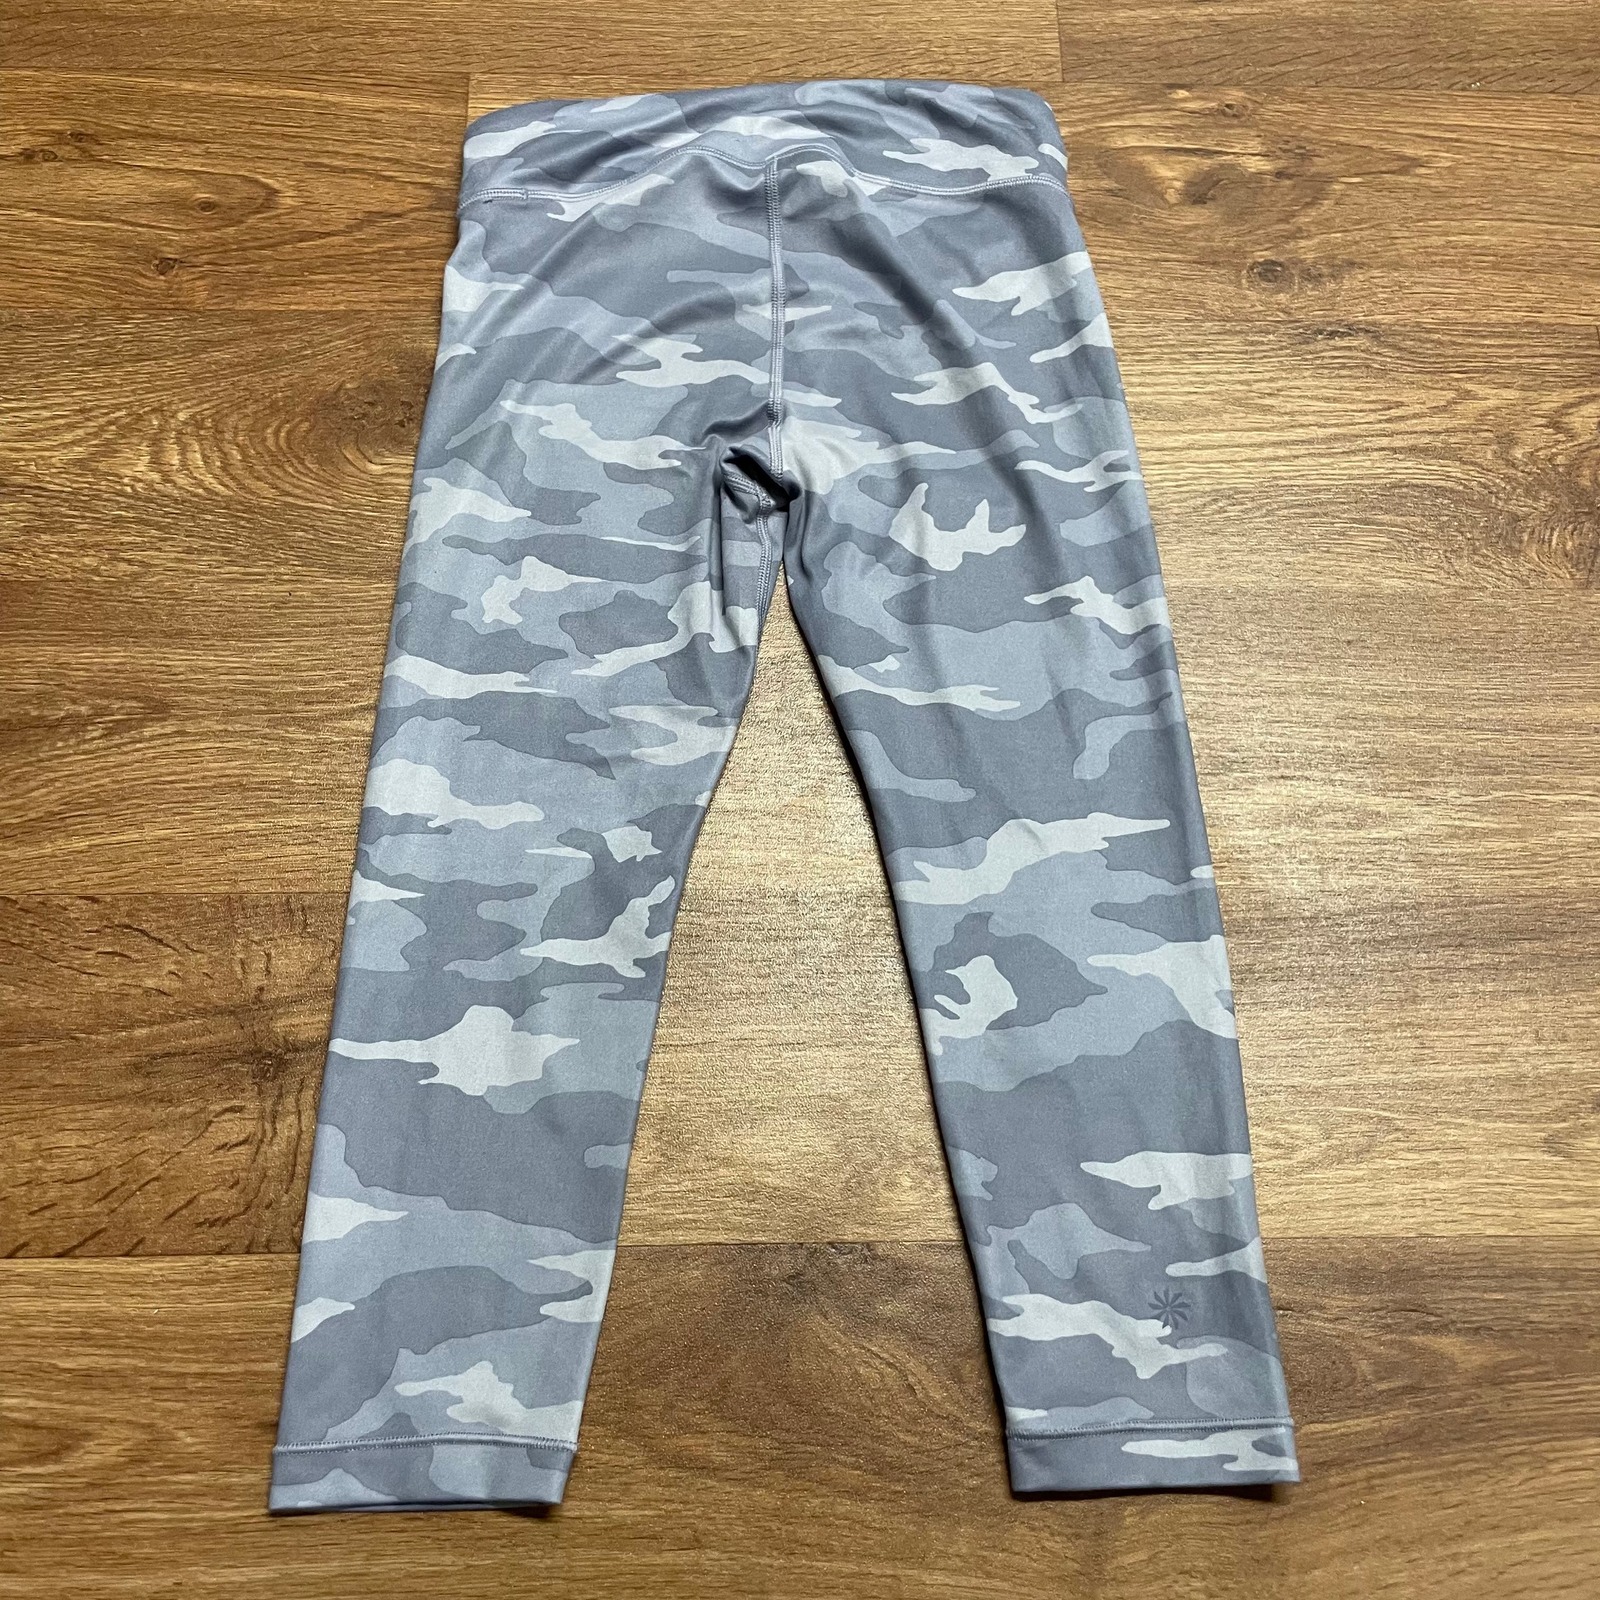 Athleta Girl High Rise Printed Chit Chat Tight Size Large 12 Black Camo